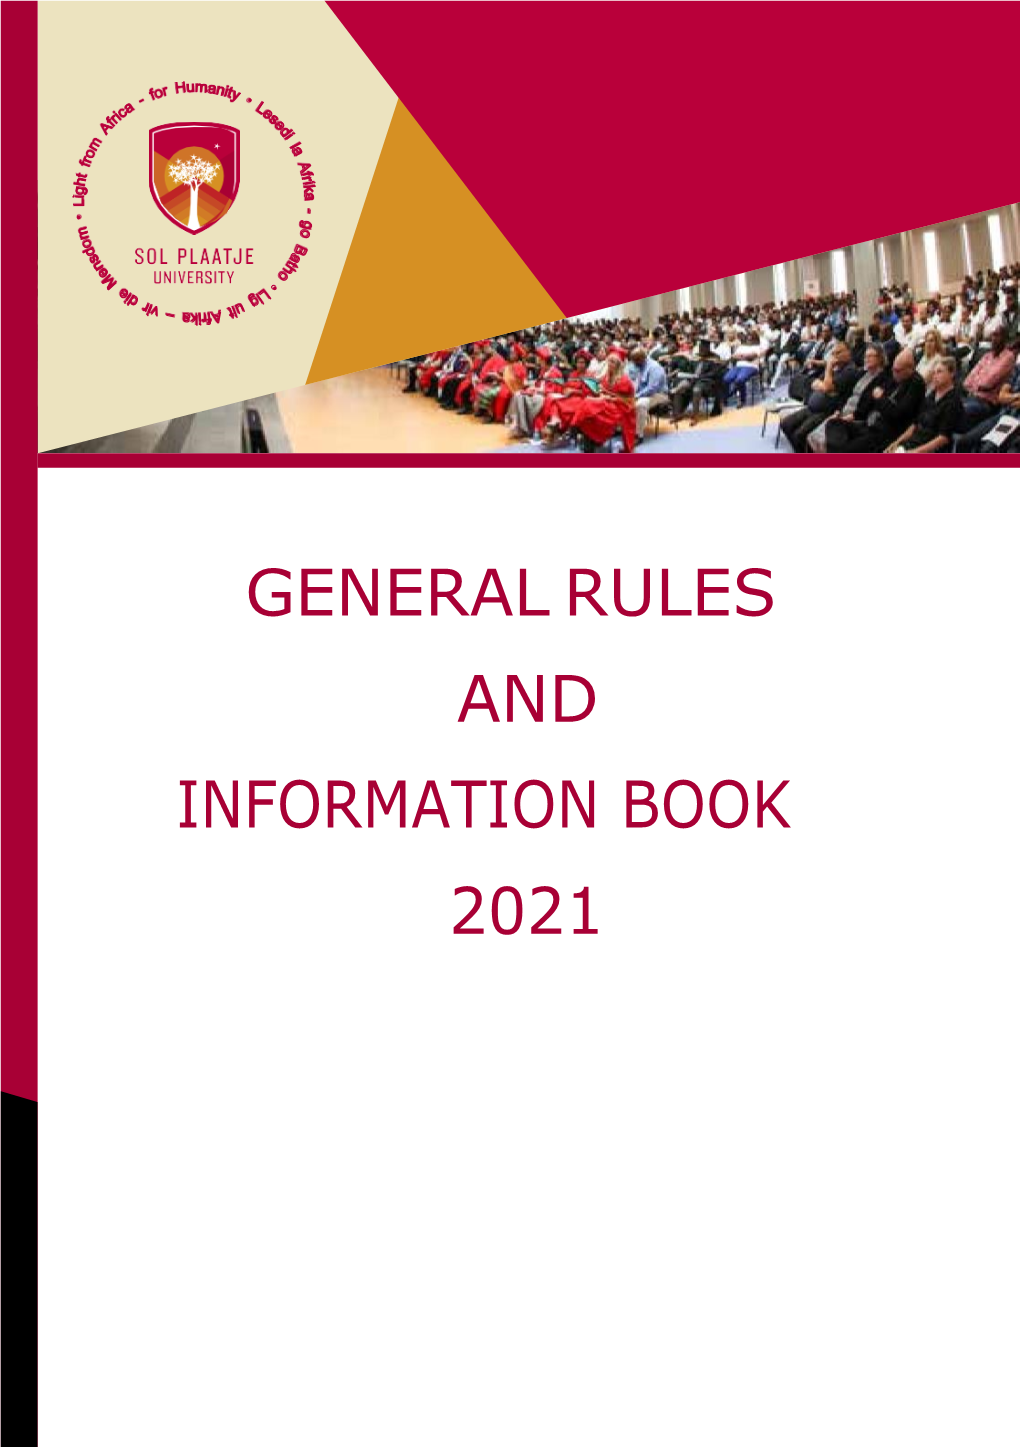 General Rules and Information Book 2021